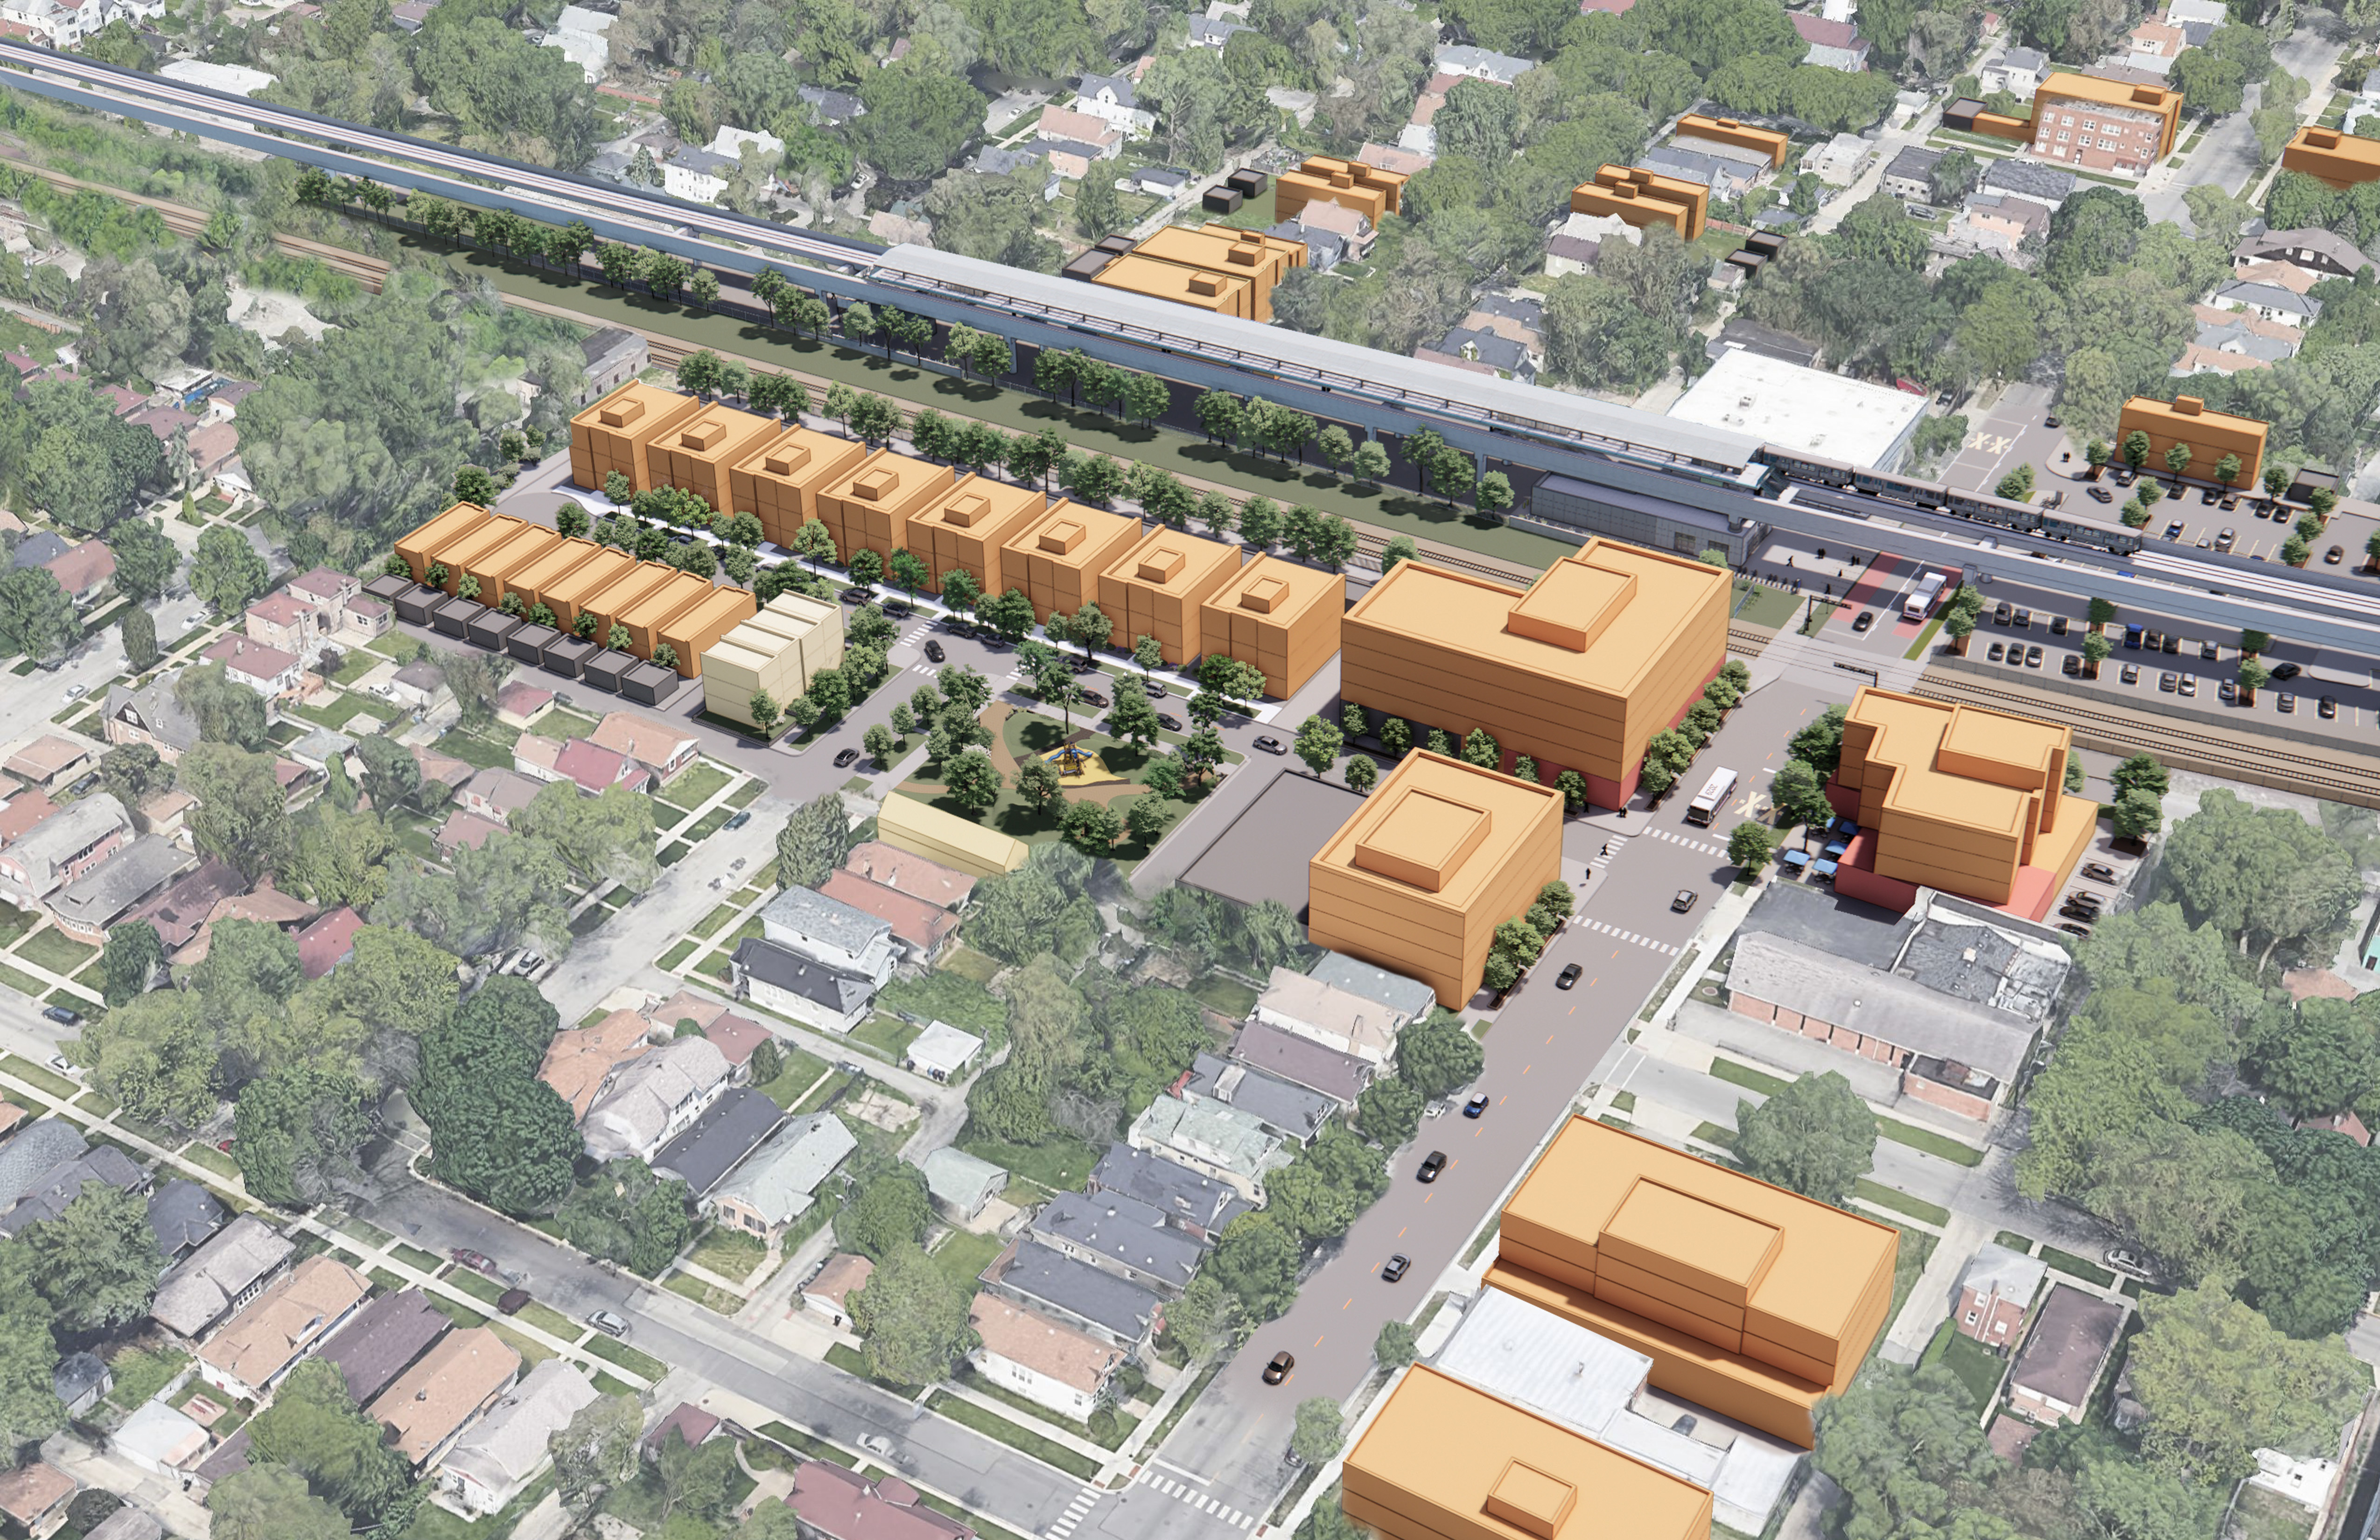 Aerial rendering of the 111th Street station area proposed catalyst sites and station at an angle